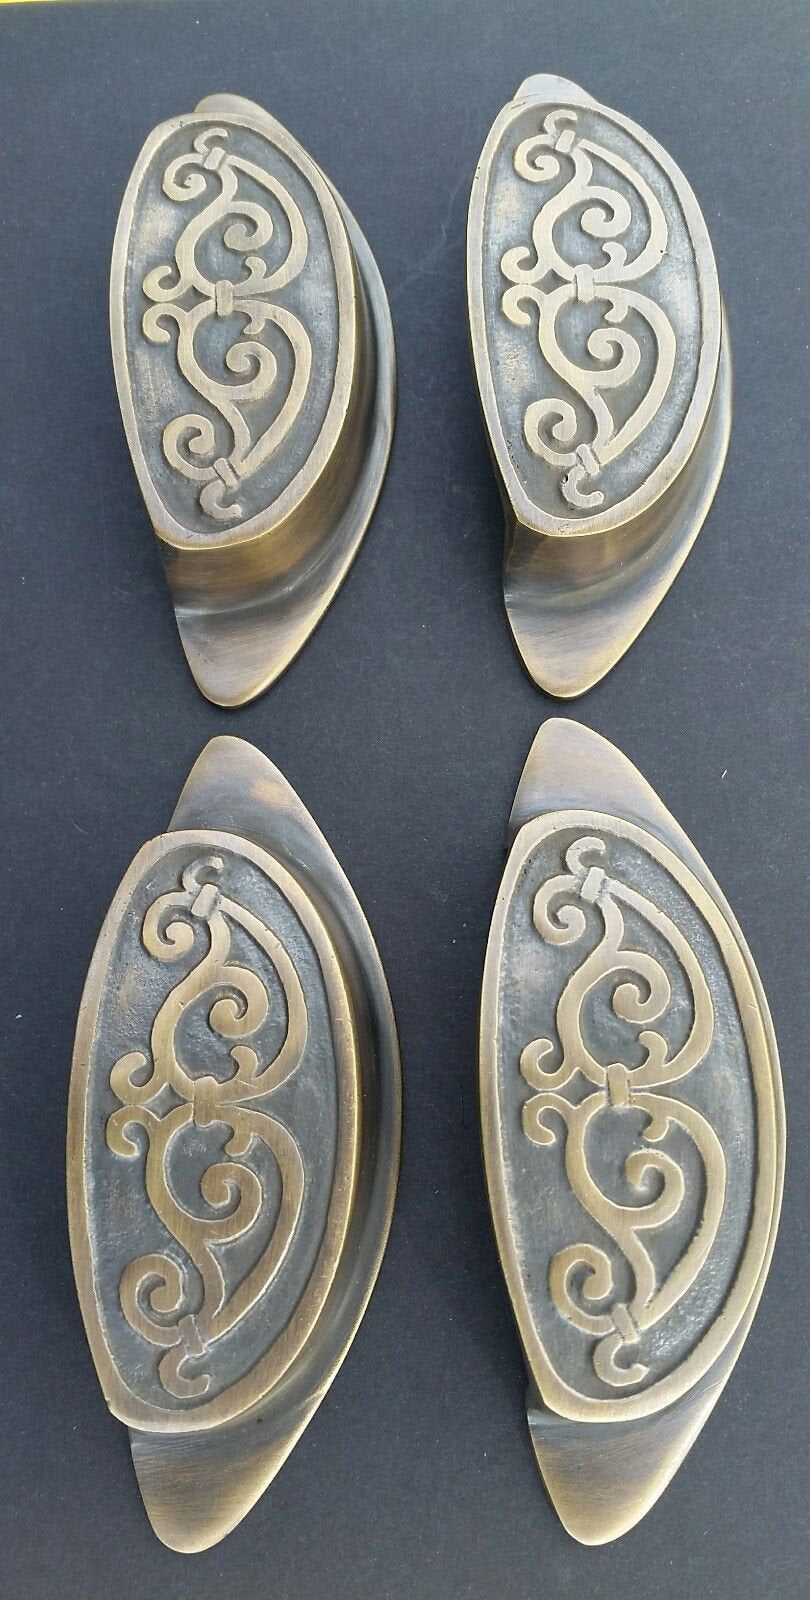 4 Solid Antique Style, Brass Apothecary Bin Cup Finger Pulls Handles 4"wide #A12